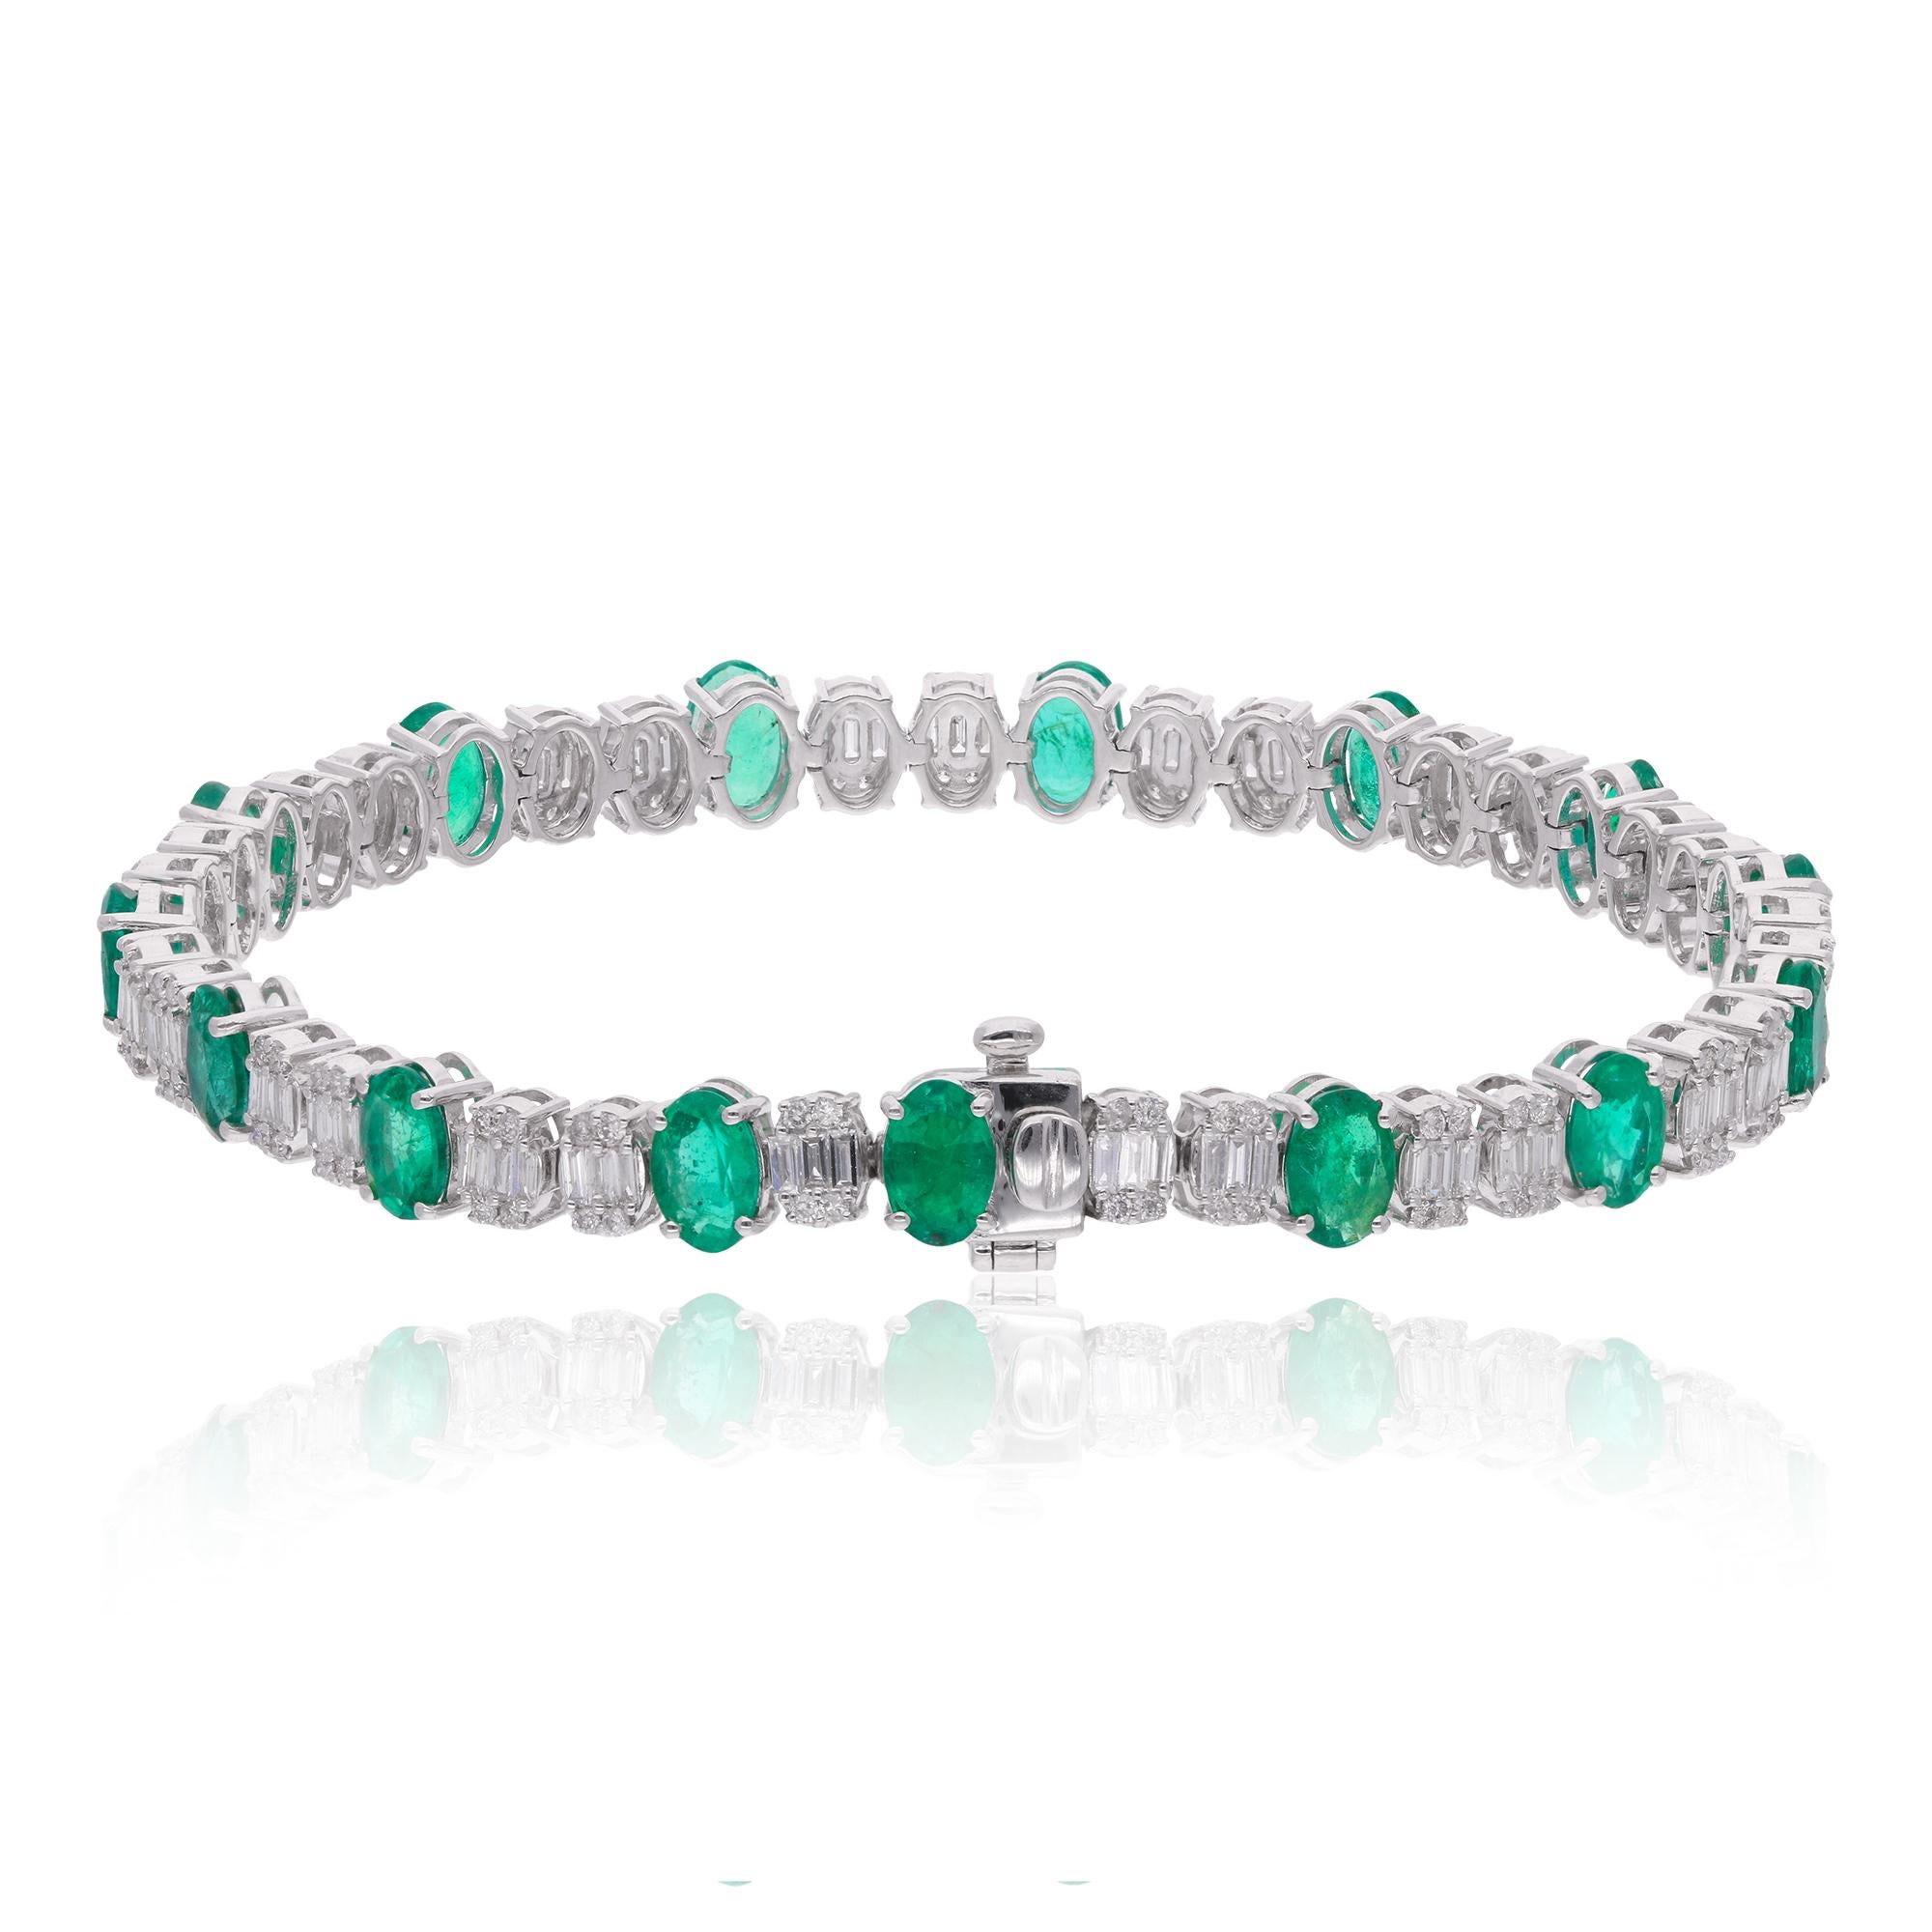 Step into a world of timeless elegance with this Oval Zambian Emerald Gemstone Bracelet, adorned with baguette diamonds and meticulously crafted in 14 karat white gold. Each element of this bracelet exudes sophistication and luxury, from the